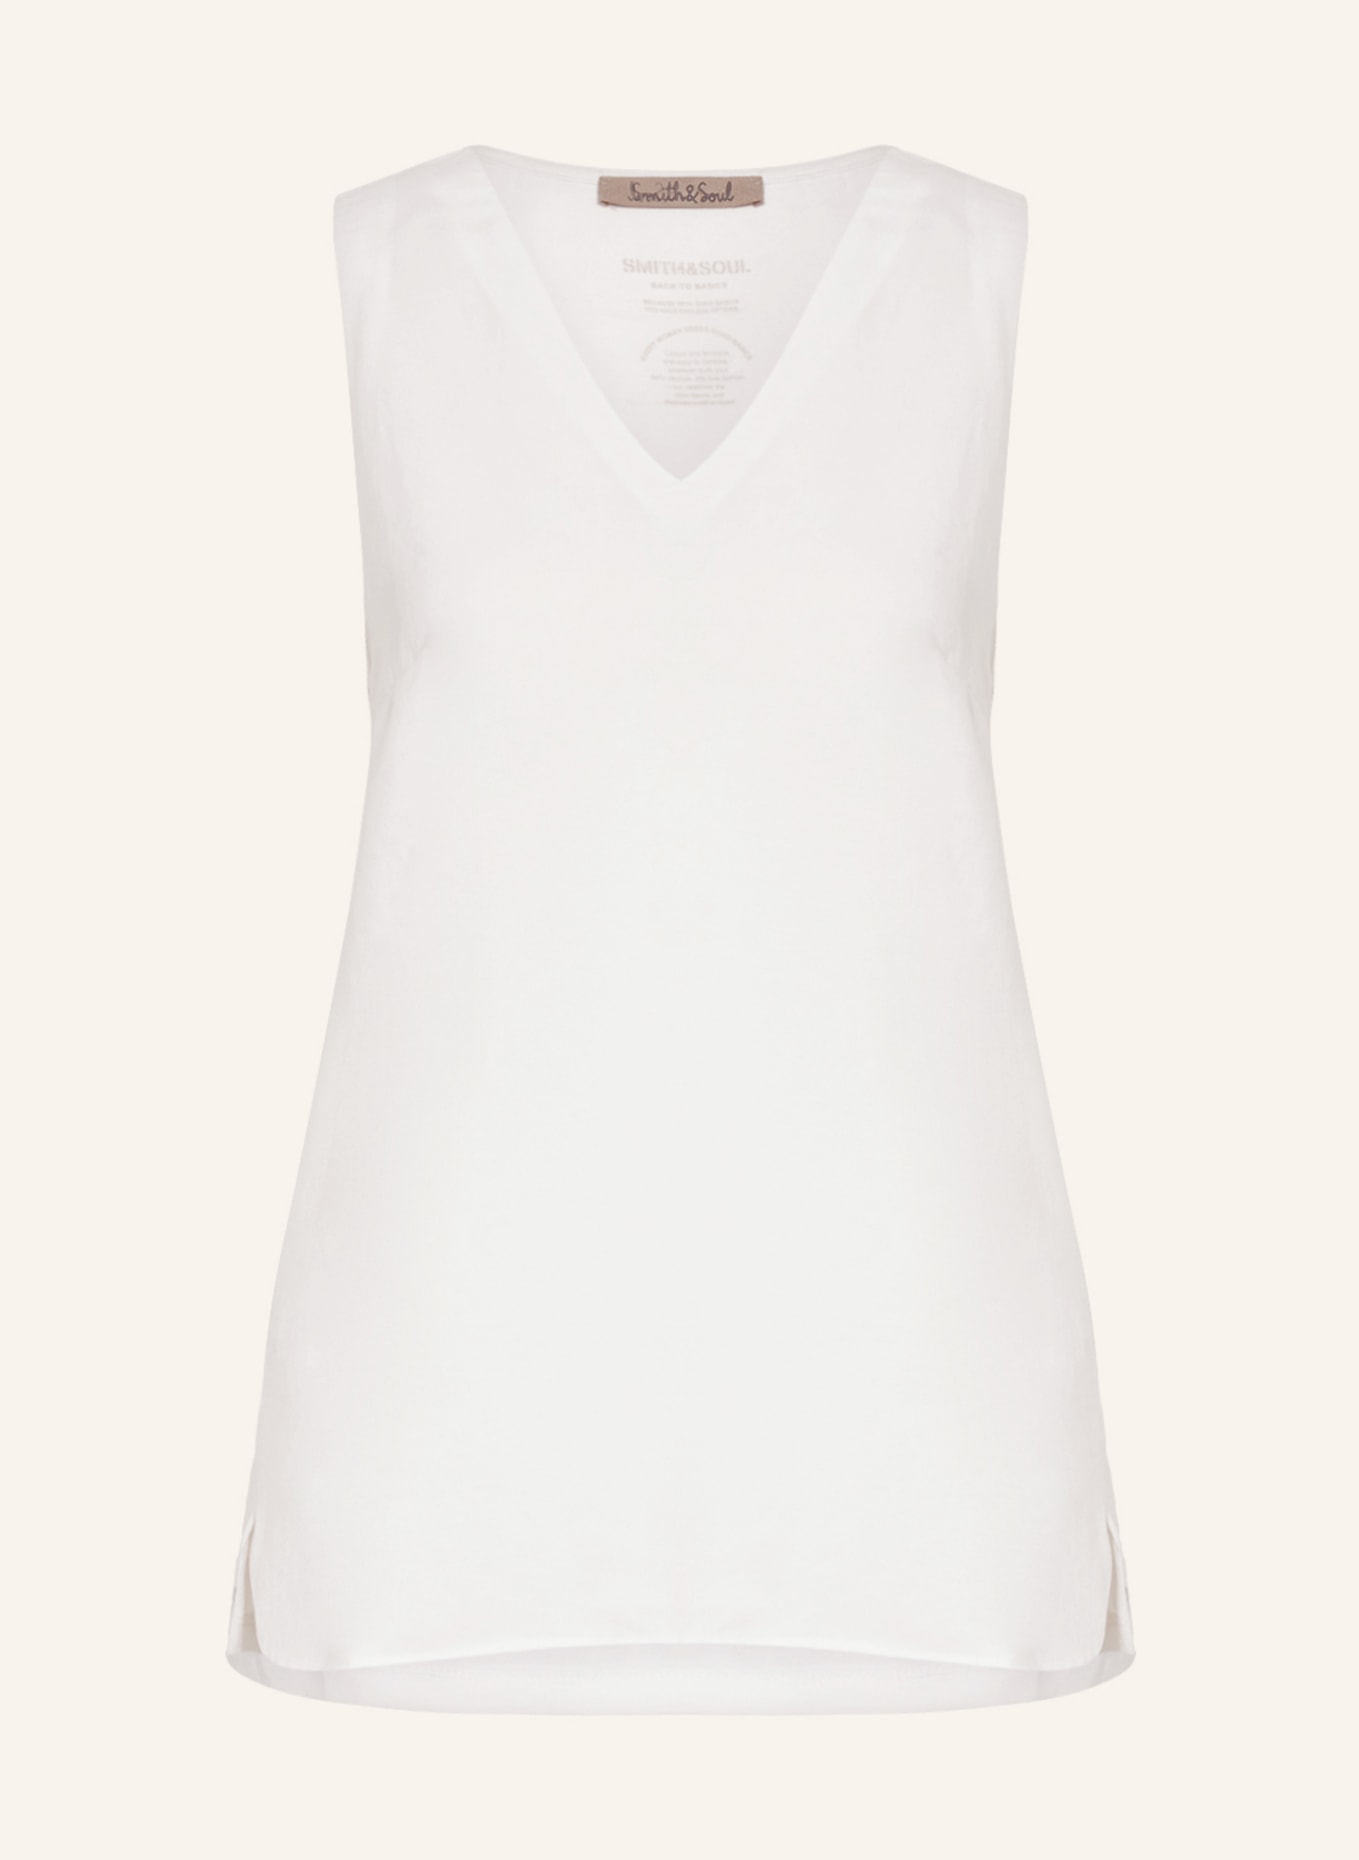 Smith & Soul Top in mixed materials, Color: WHITE (Image 1)